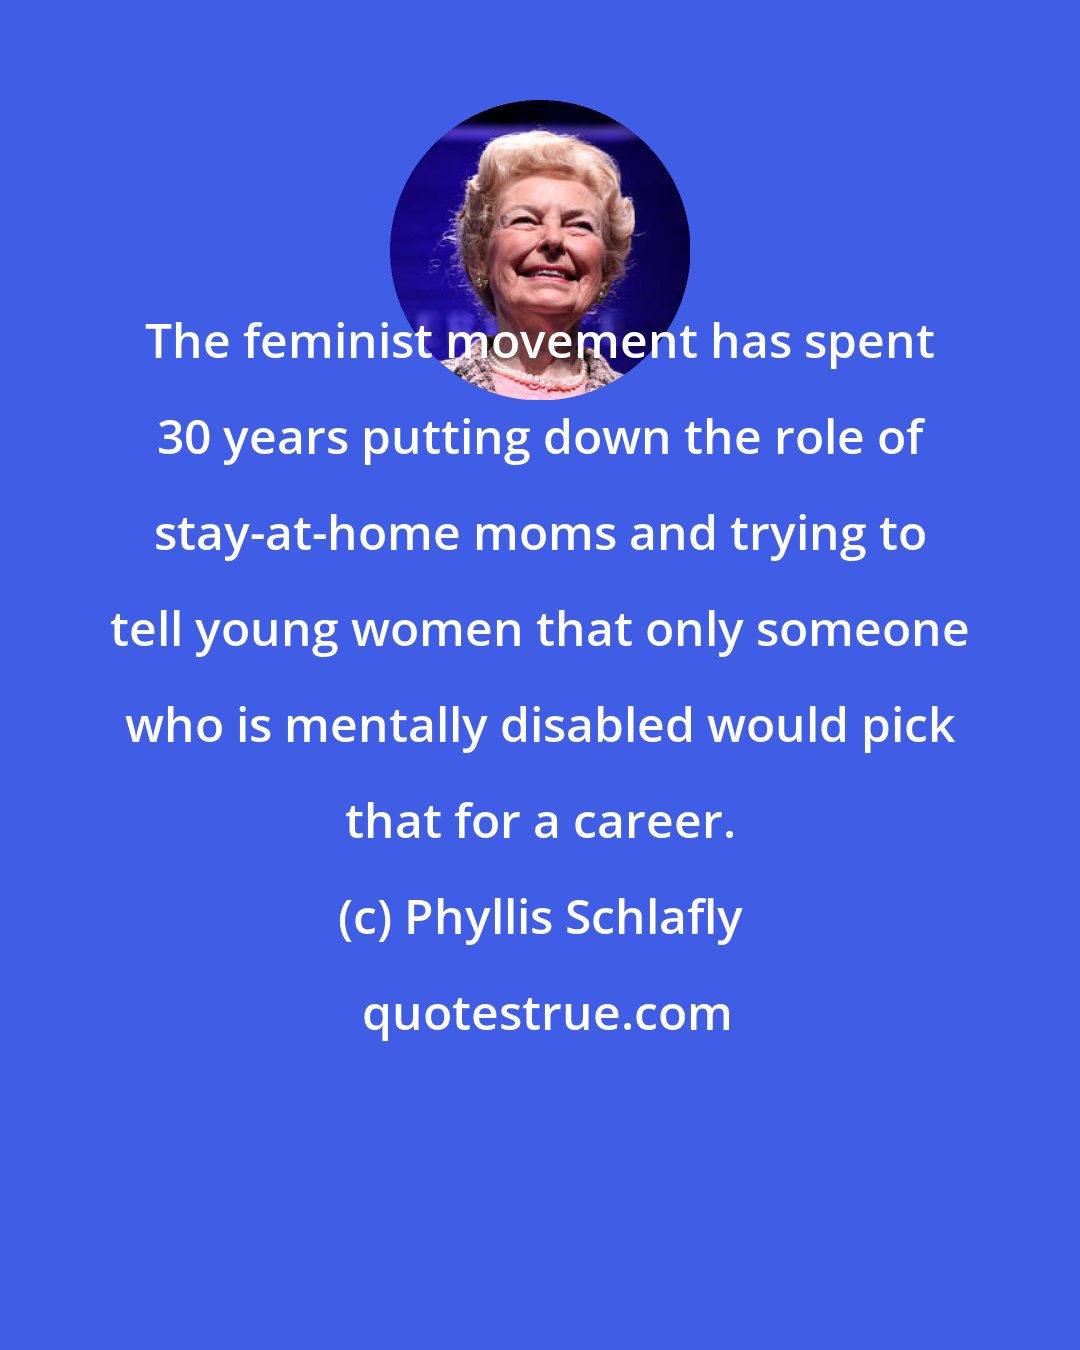 Phyllis Schlafly: The feminist movement has spent 30 years putting down the role of stay-at-home moms and trying to tell young women that only someone who is mentally disabled would pick that for a career.